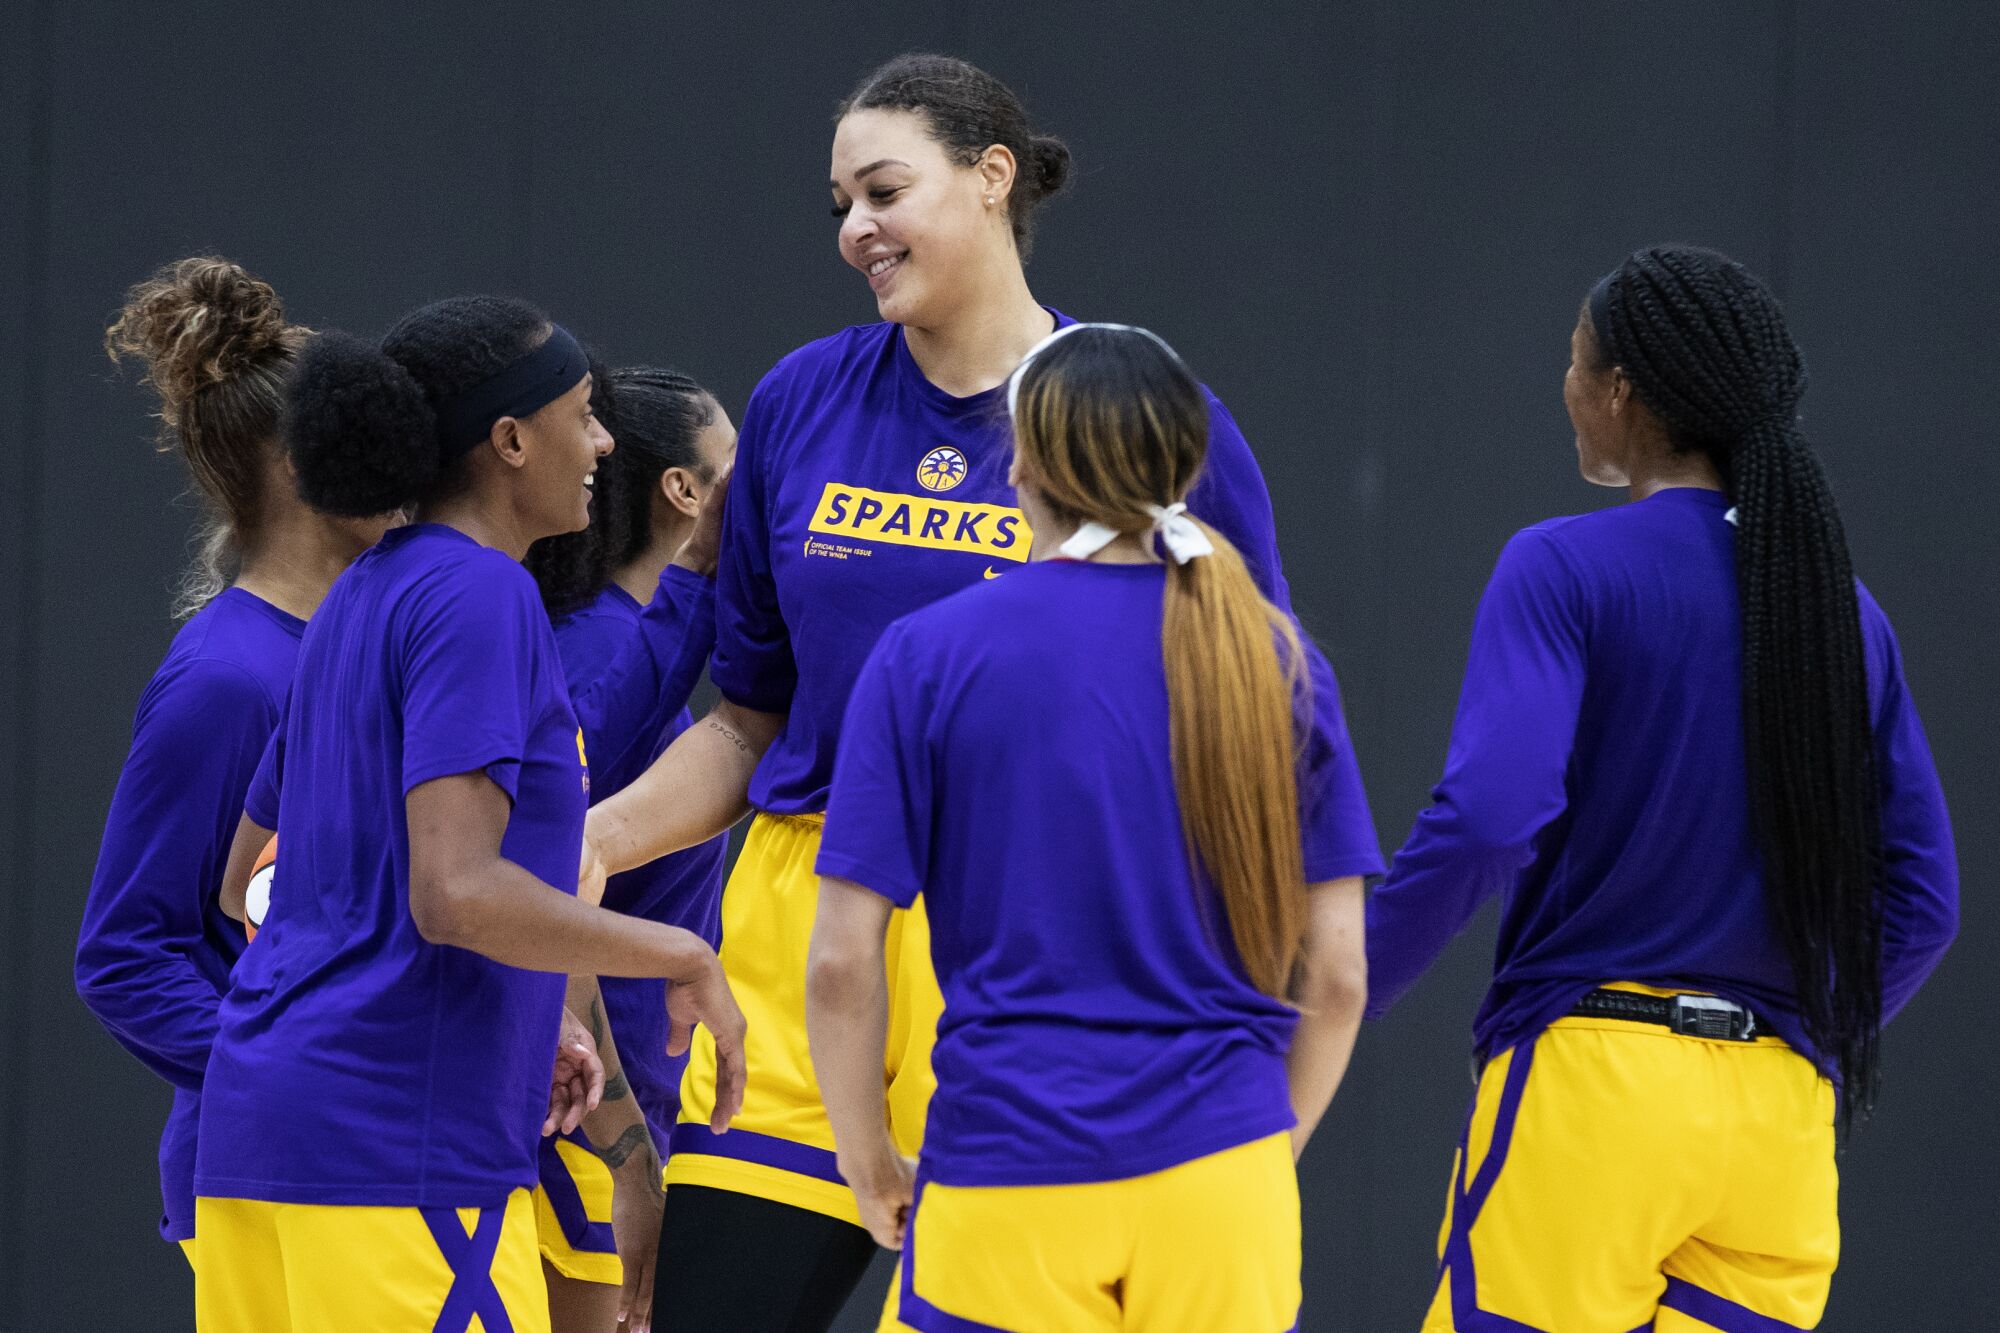 Six-foot-eight Liz Cambage is surrounded by Sparks teammates at practice.